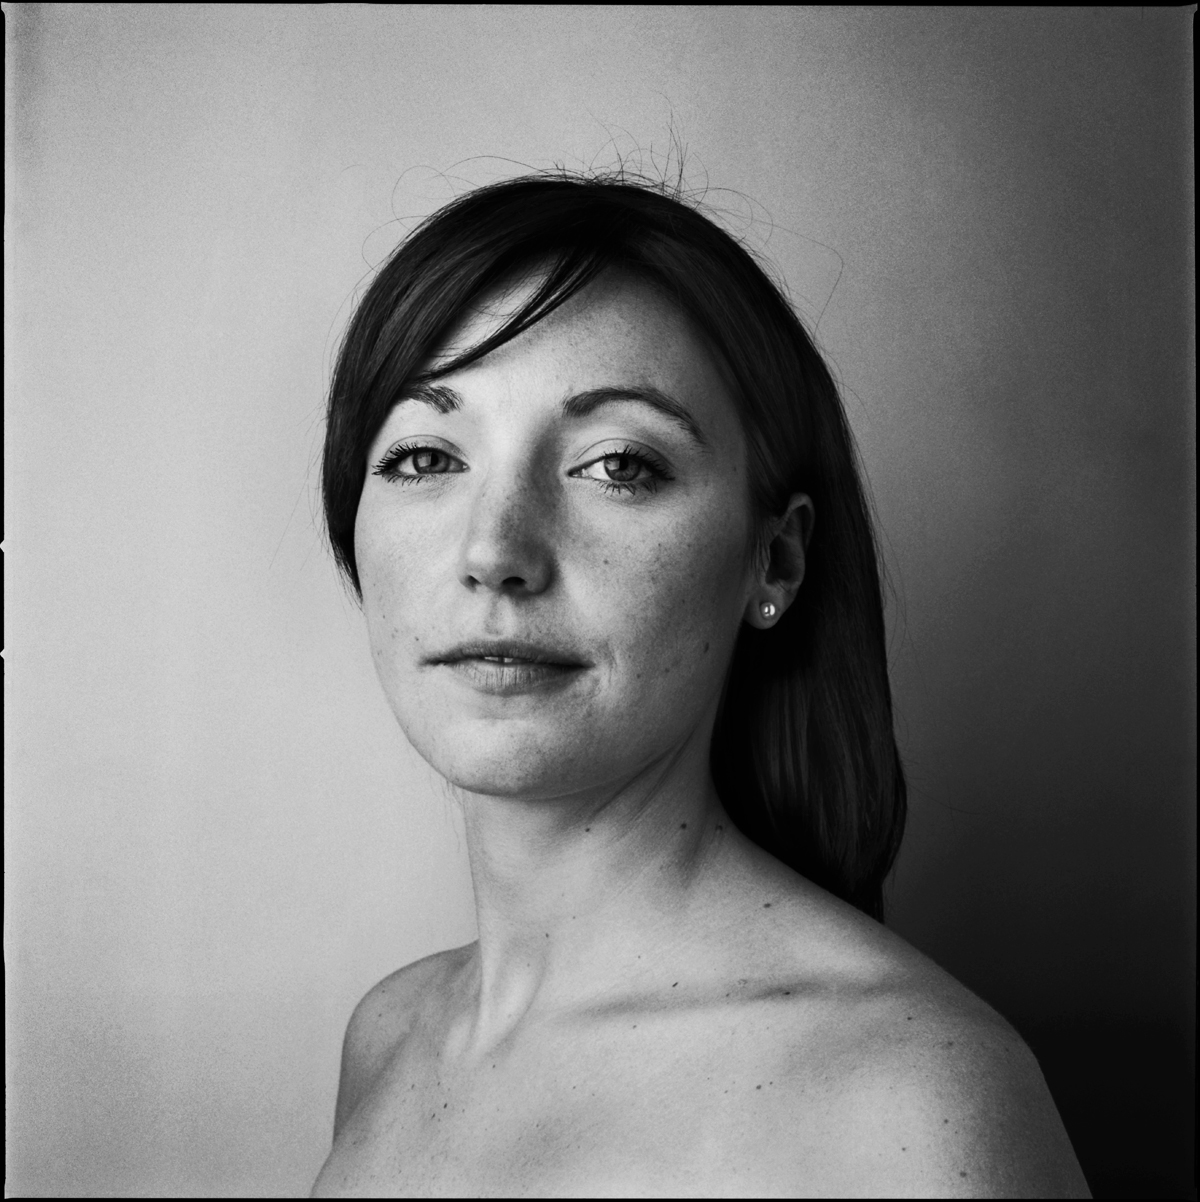 photo art girl woman Eating disorder beauty social issue portrait fine art black and white interview series Hasselblad film photography